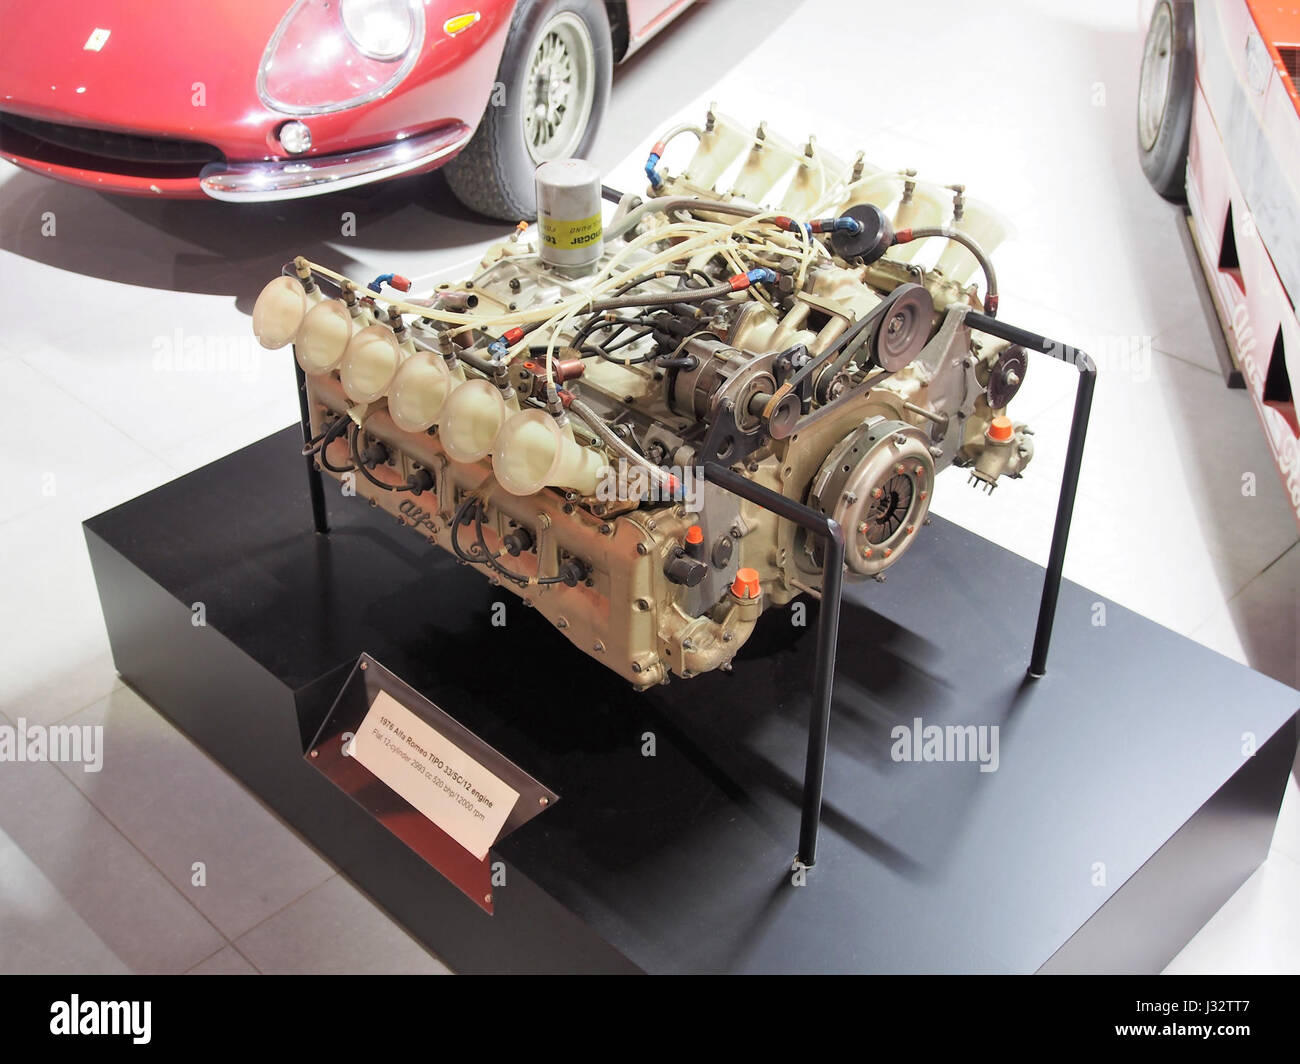 Flat 12 Engine High Resolution Stock Photography And Images Alamy